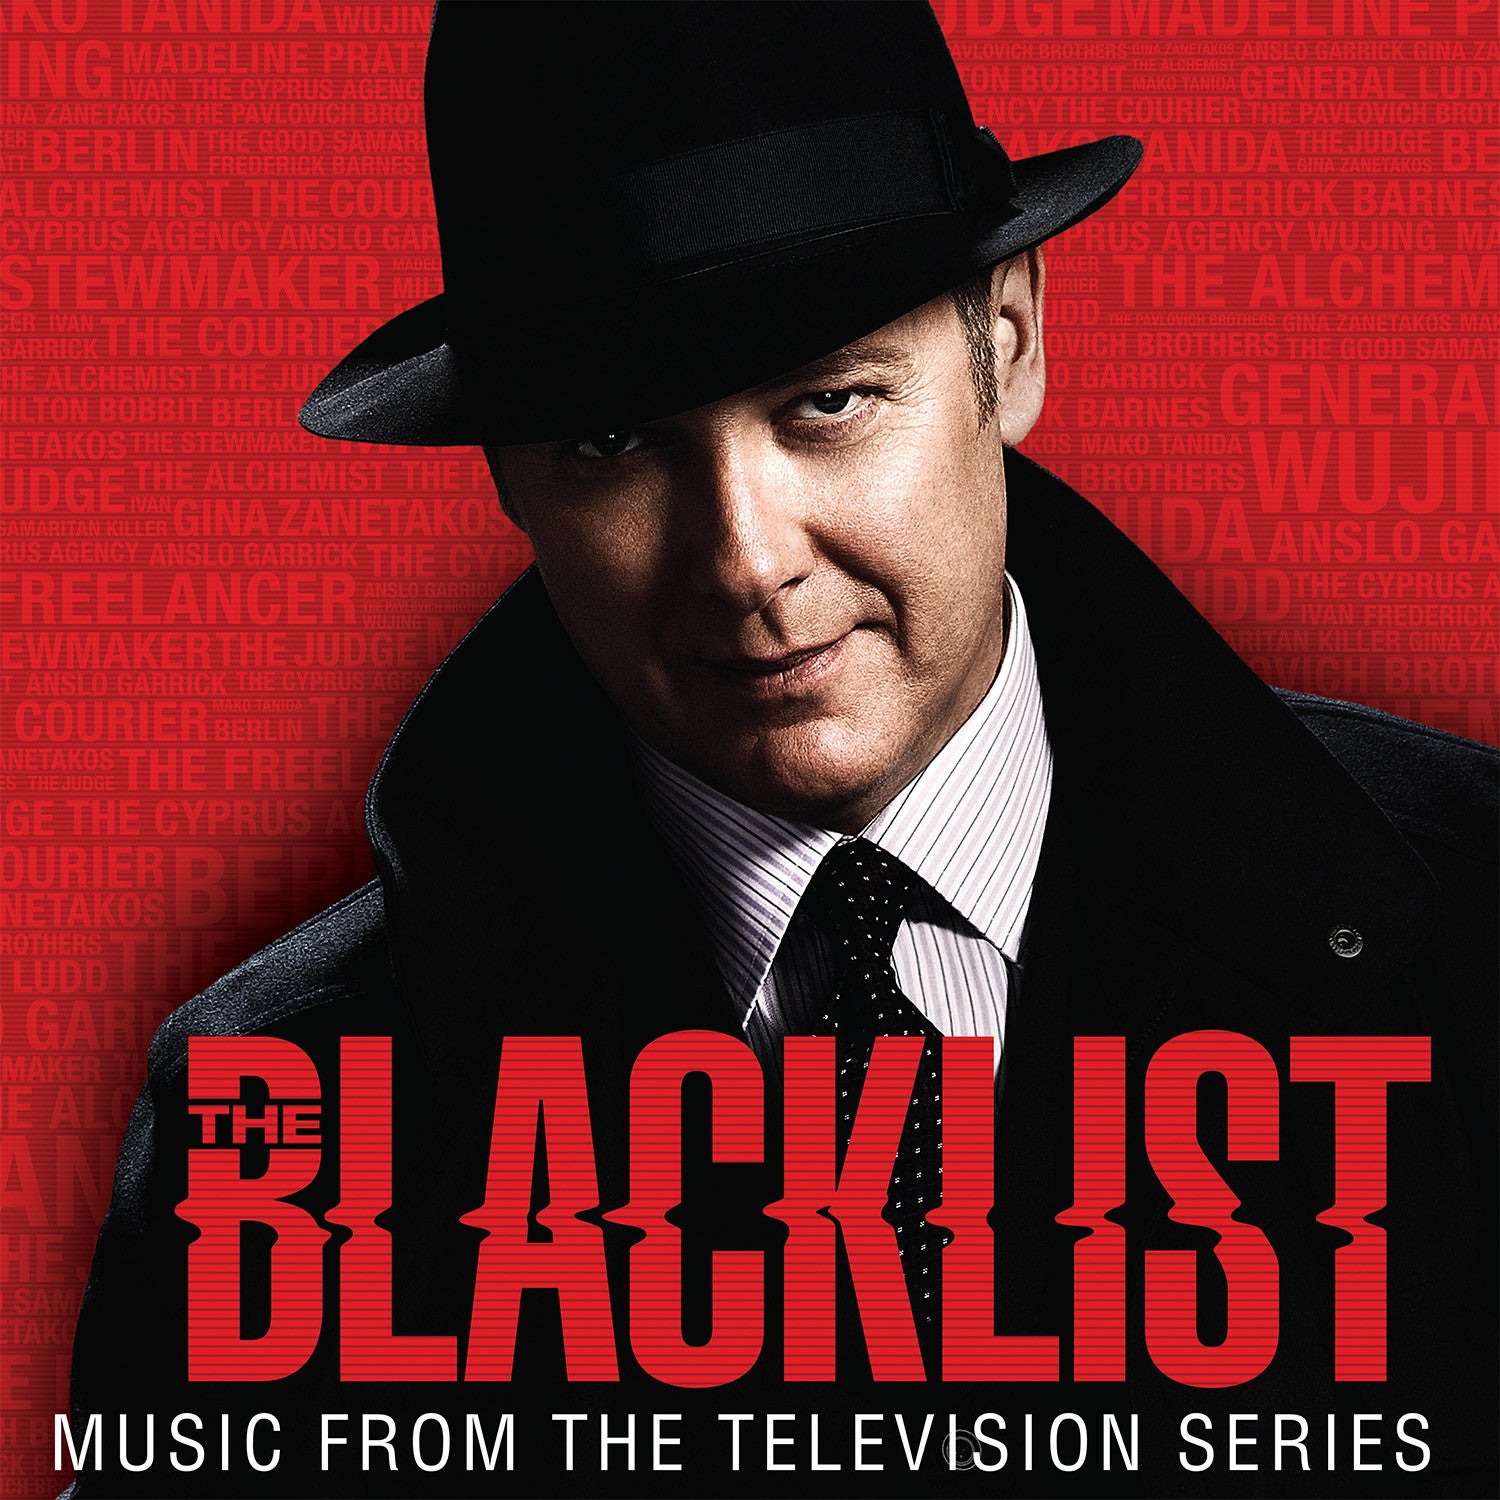 SPACELAB9 TO RELEASE “THE BLACKLIST: MUSIC FROM THE TELEVISION SERIES” LP FOR RECORD STORE DAY 2016